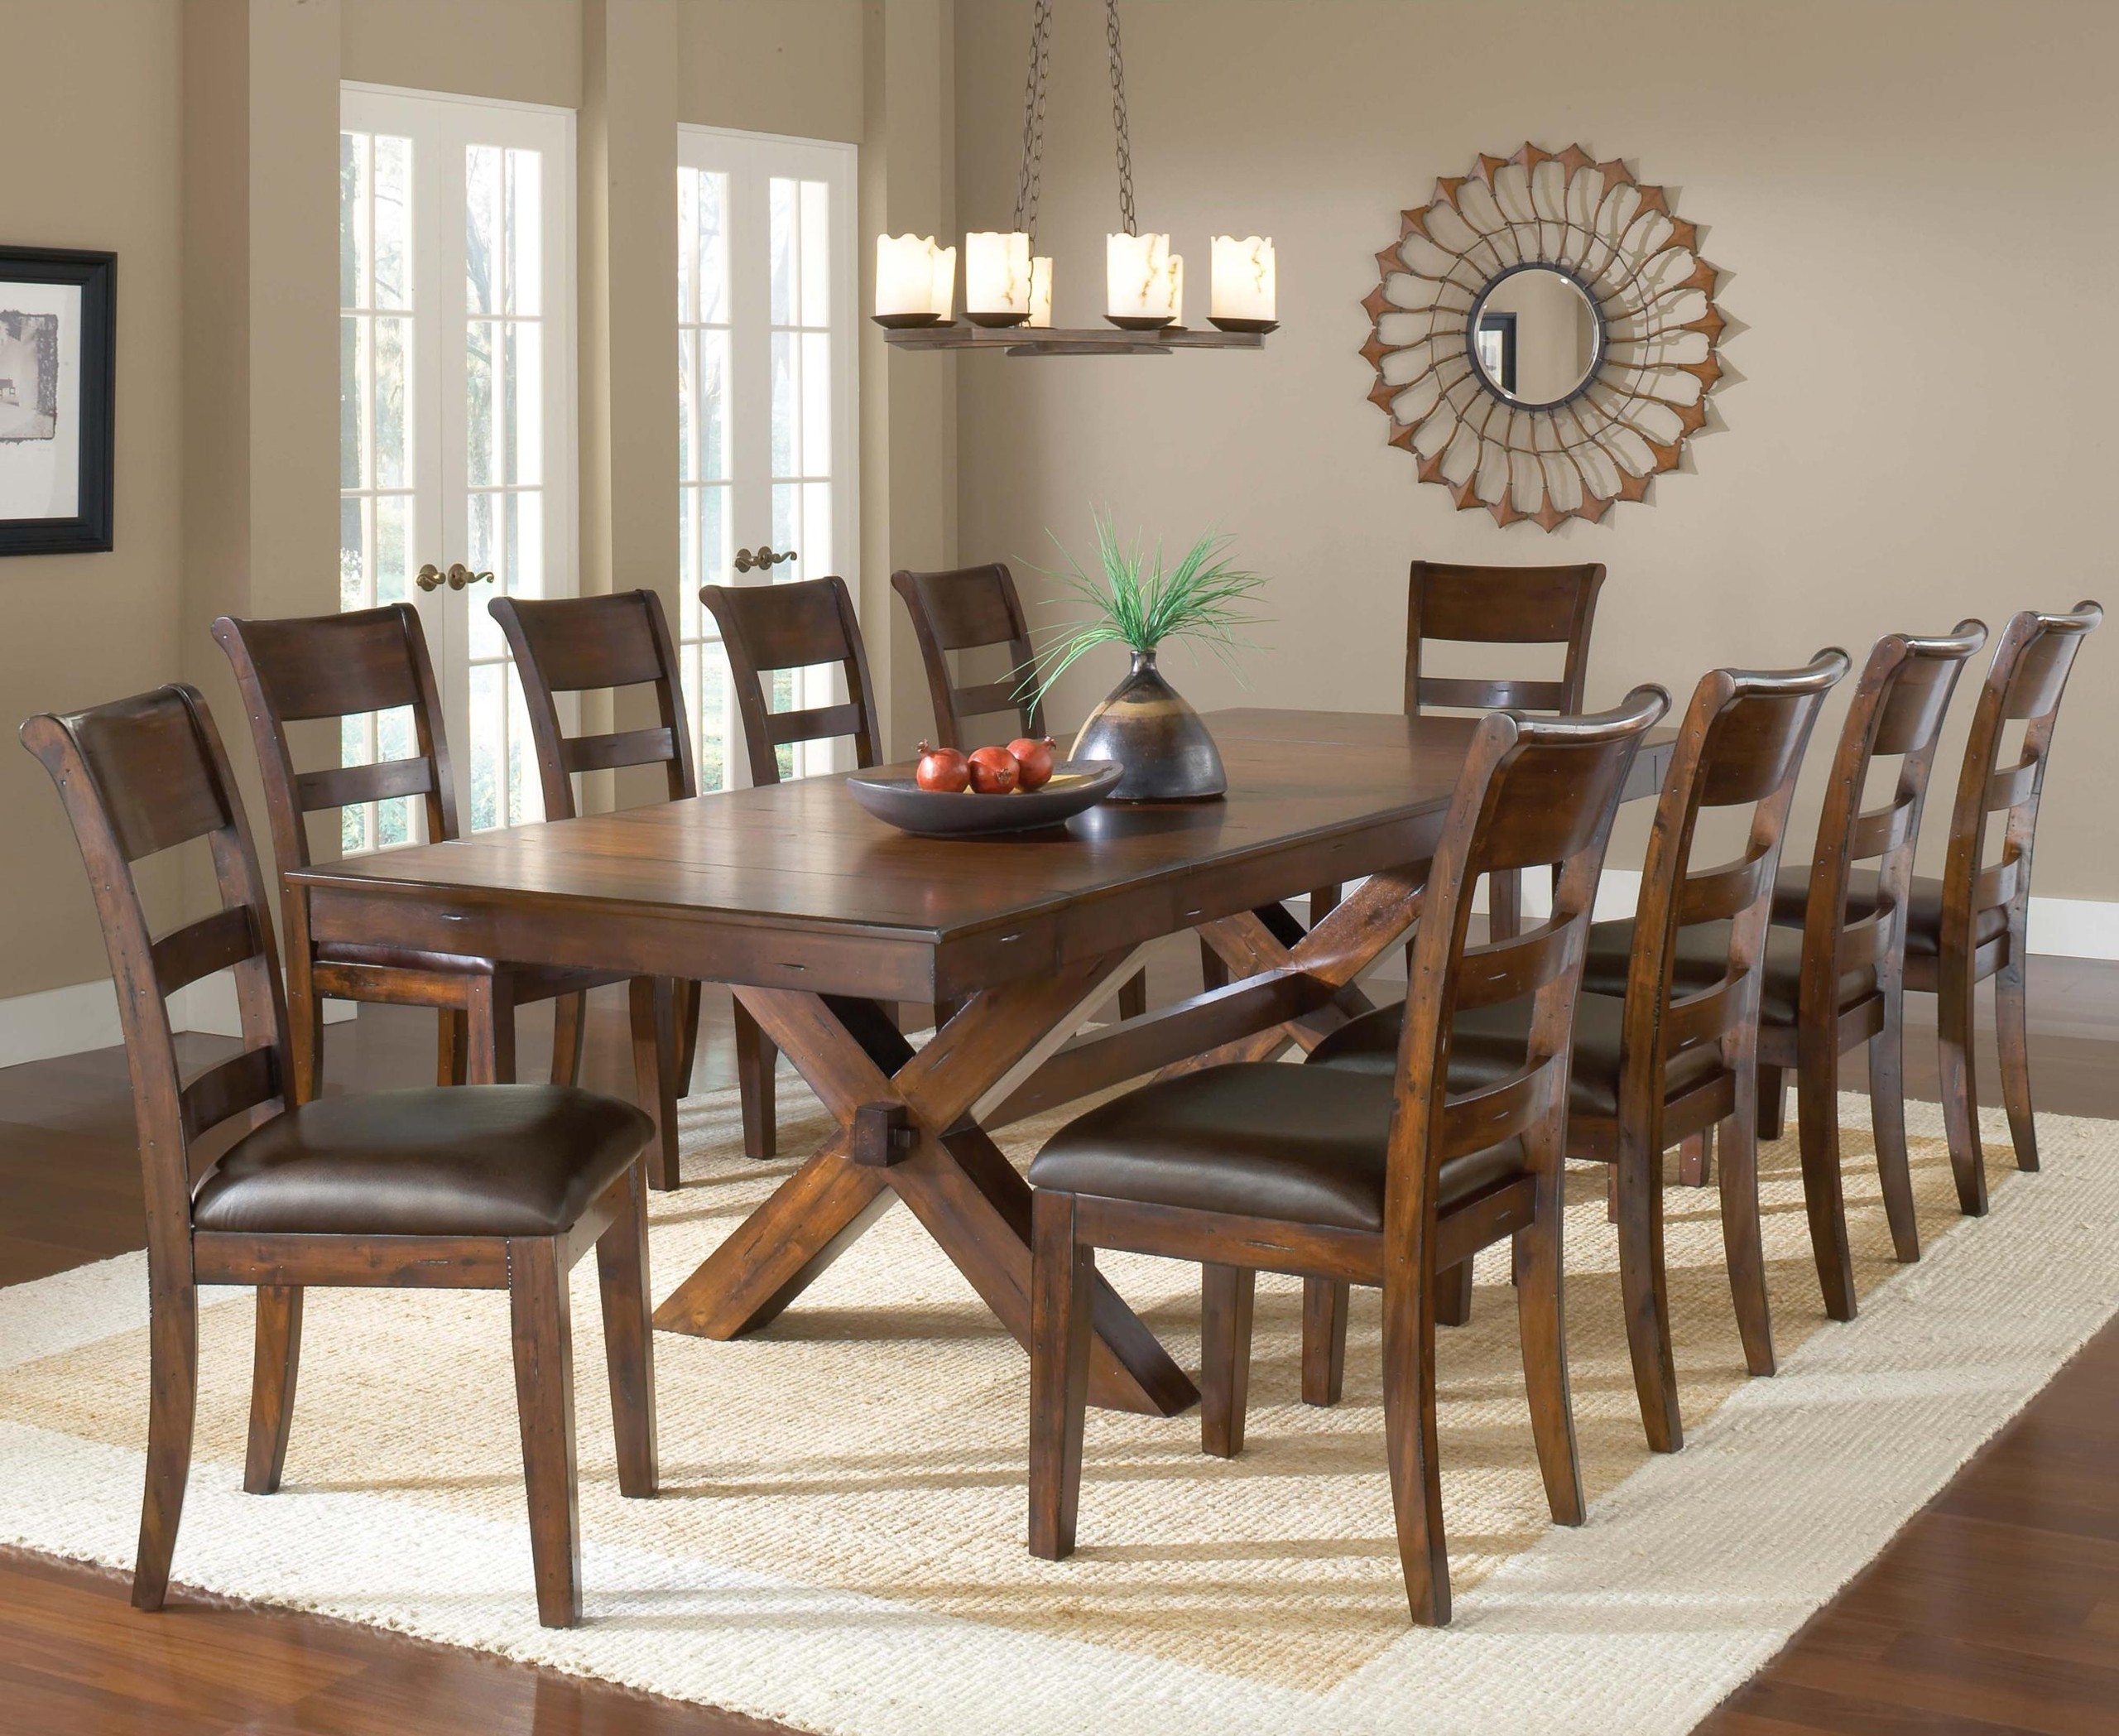 Best 10 Seater Dining Table Set For 10 Persons Ideas On Foter